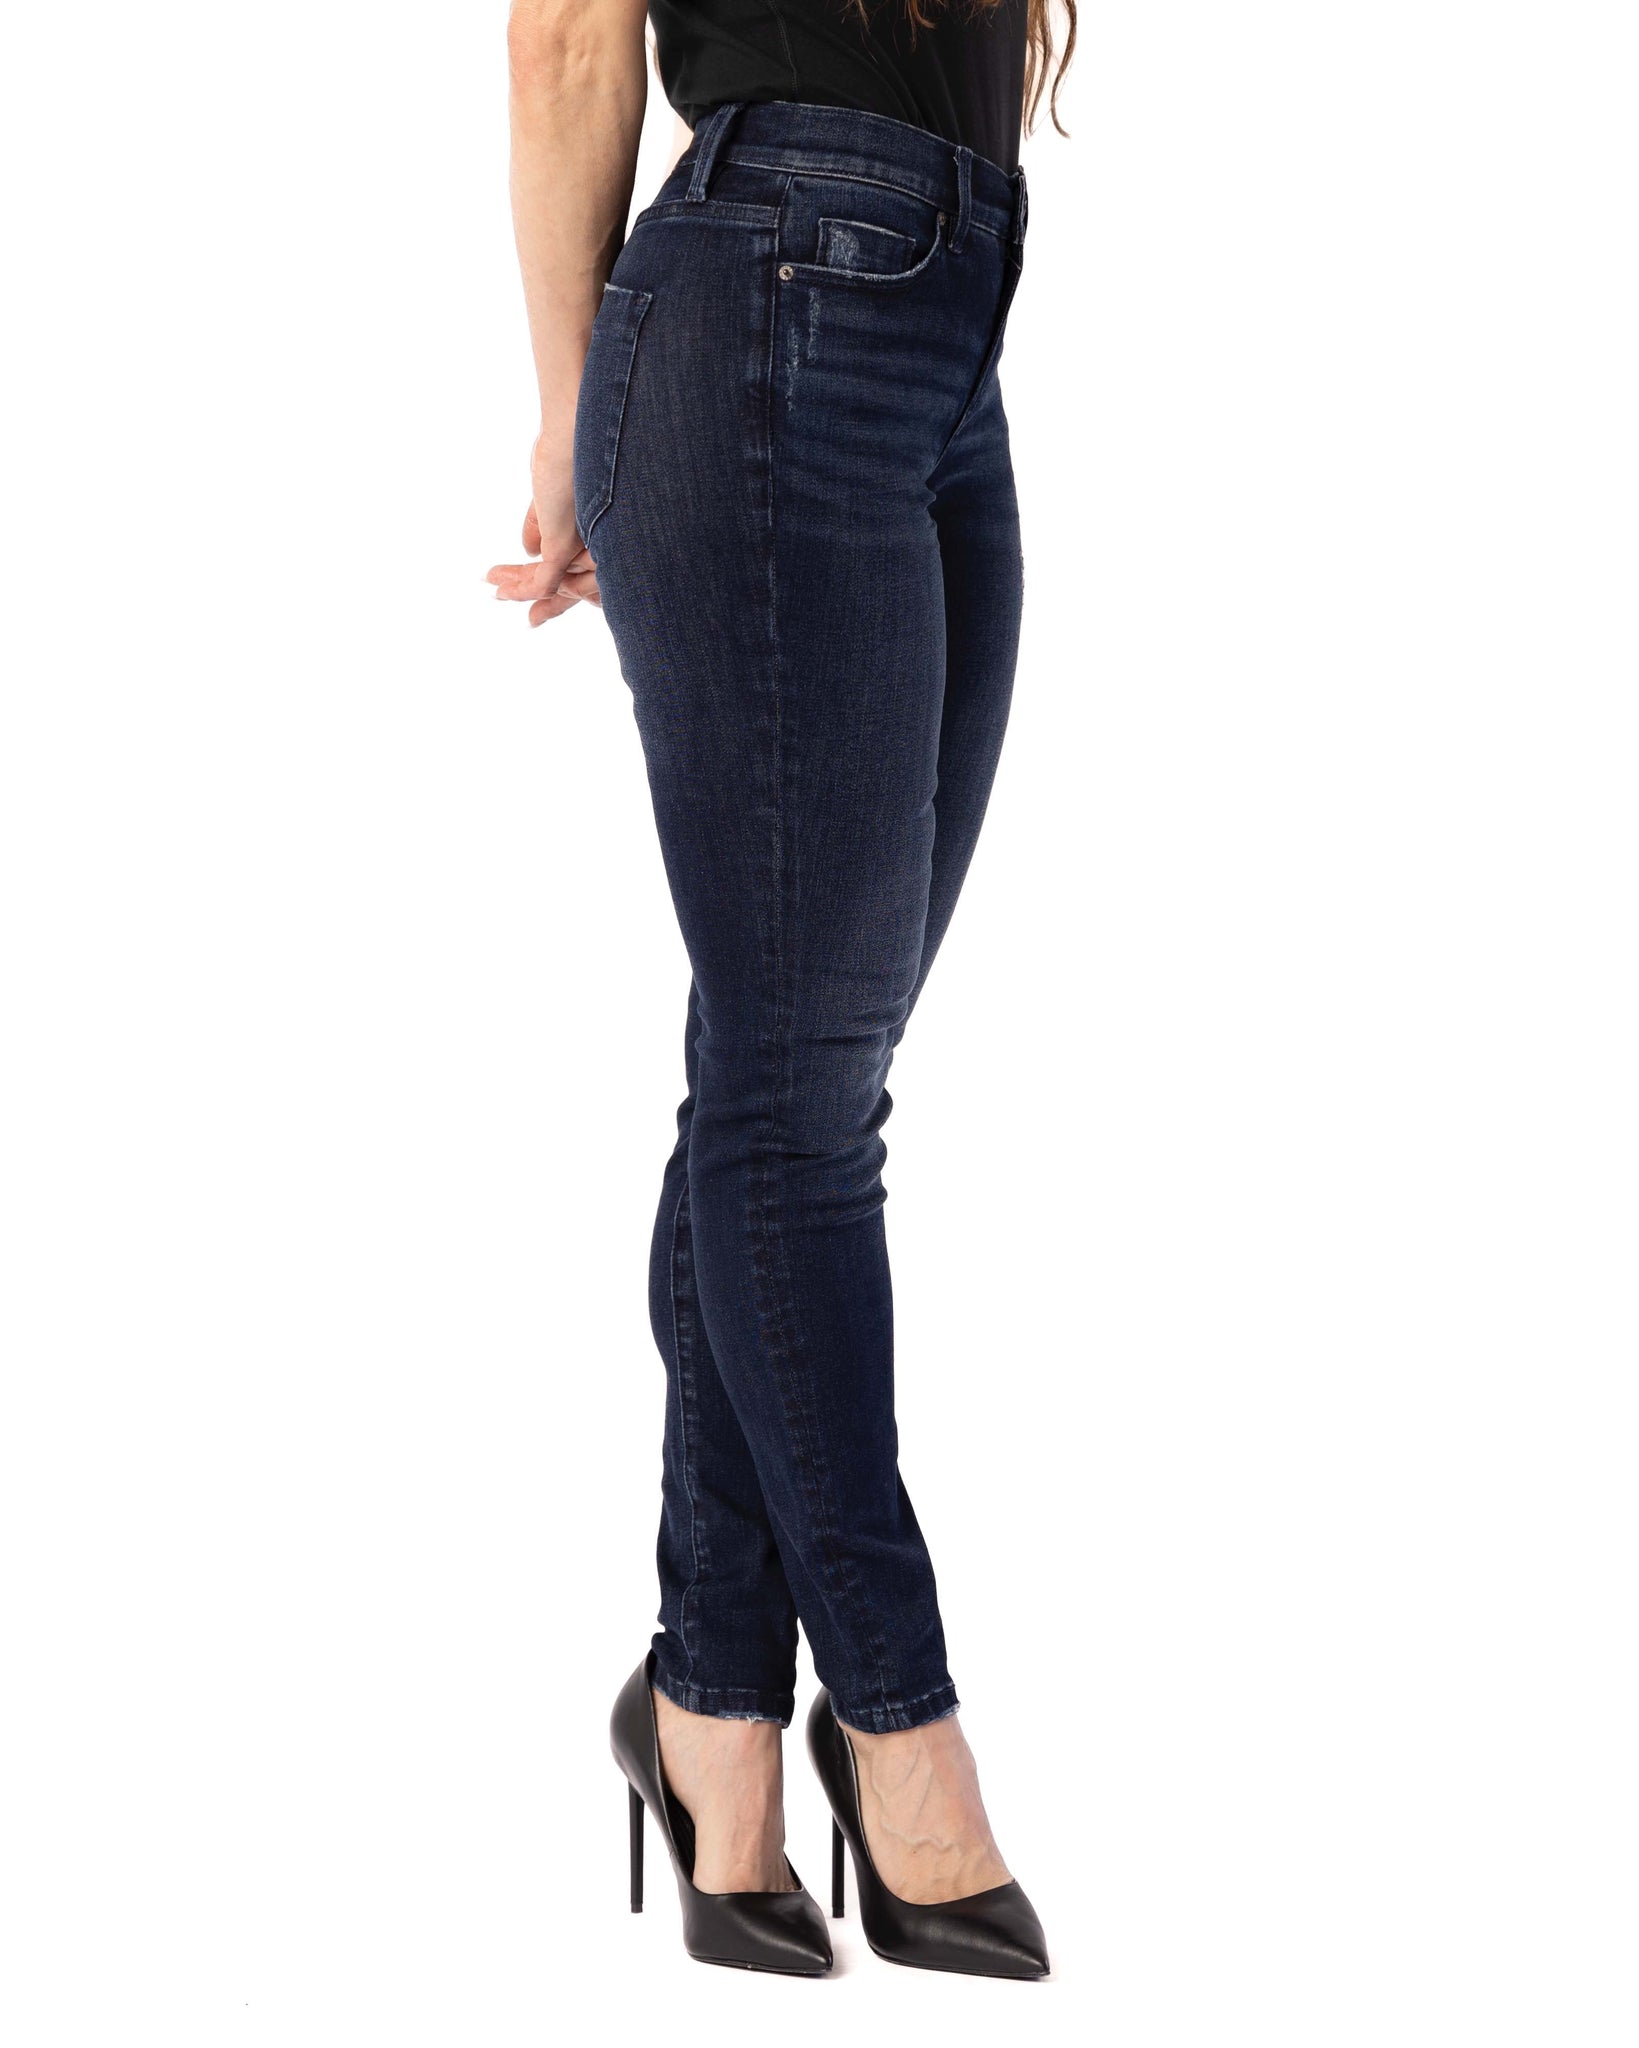 ZW HIGH-WAISTED CONTOUR SLIM FIT JEANS